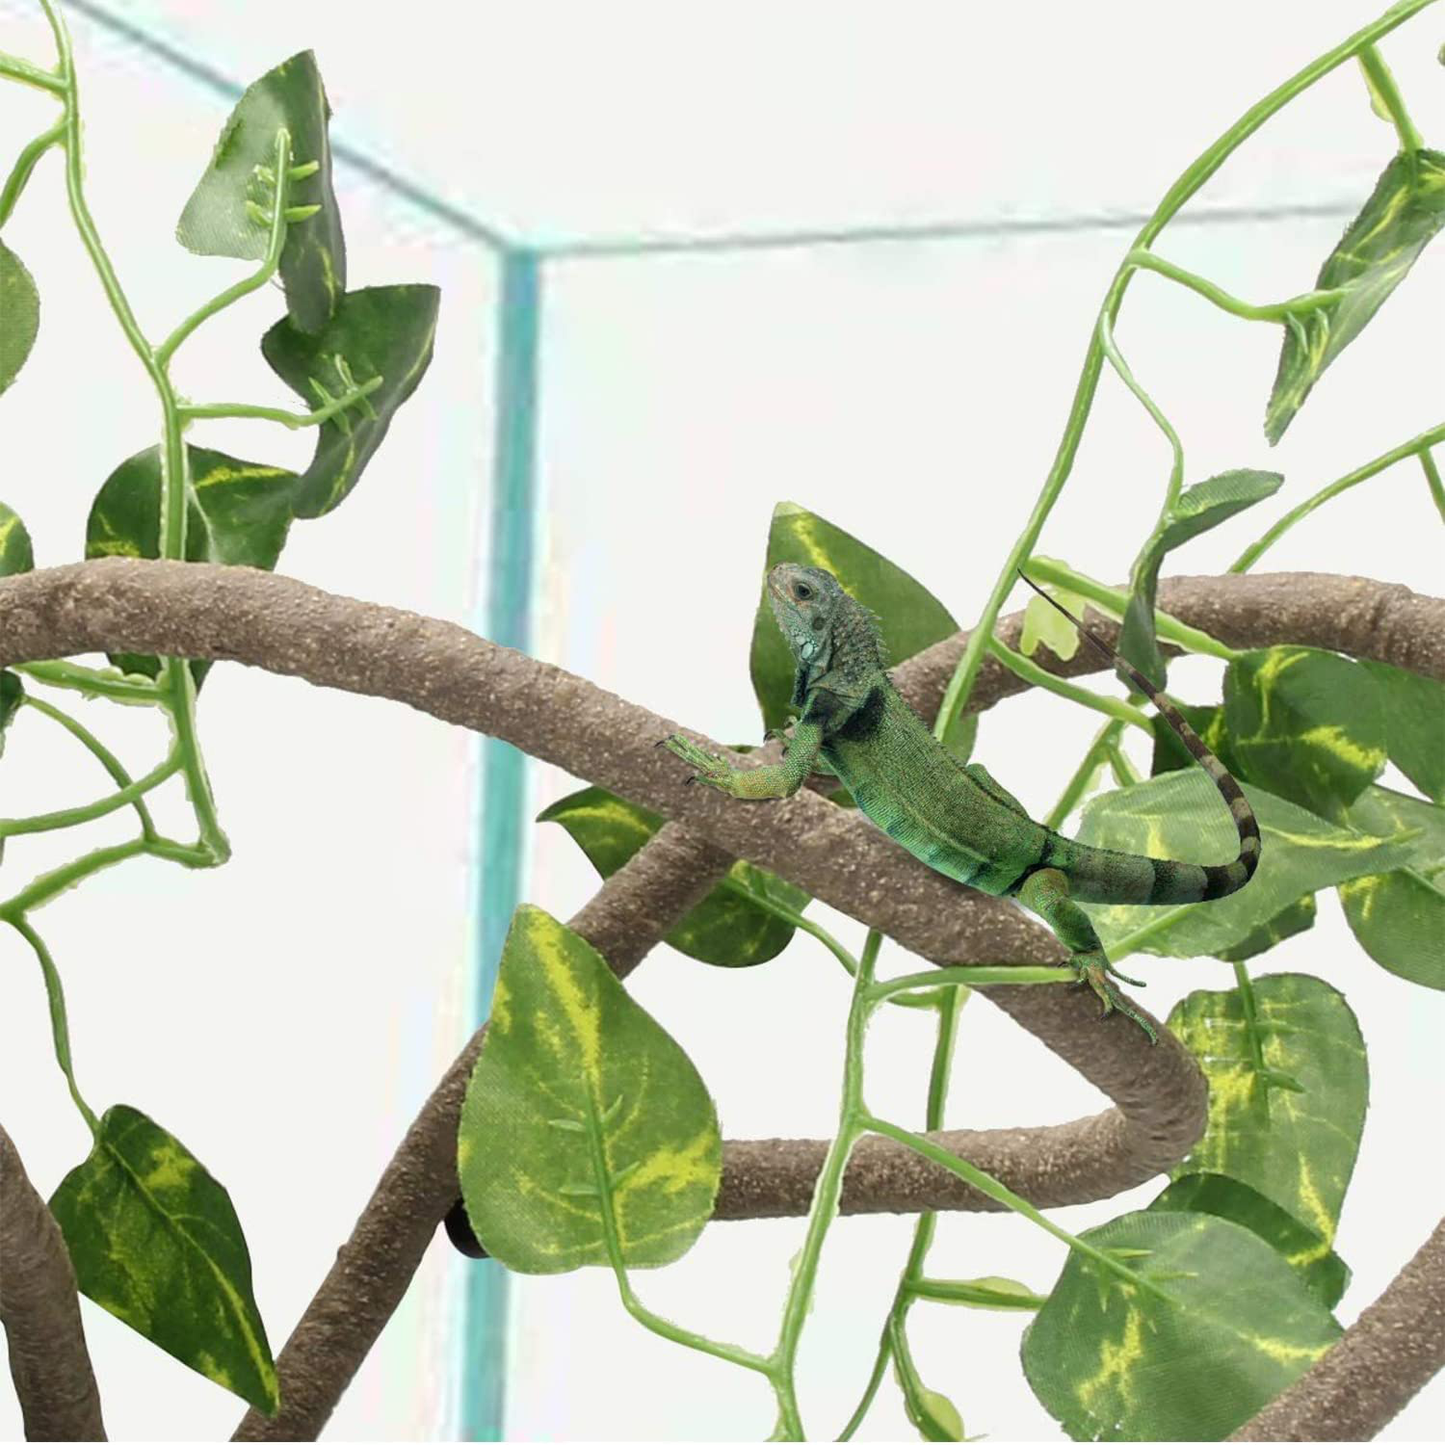 Claymmny 5-In-1 Reptile Terrarium Decoration Set, Bearded Dragon Hammock with Jungle Vines Artificial Plants Leaves & Suction Cup Habitat Accessories for Climbing Chameleon Hermit Crab Lizards Gecko Animals & Pet Supplies > Pet Supplies > Reptile & Amphibian Supplies > Reptile & Amphibian Habitat Accessories Calymmny   